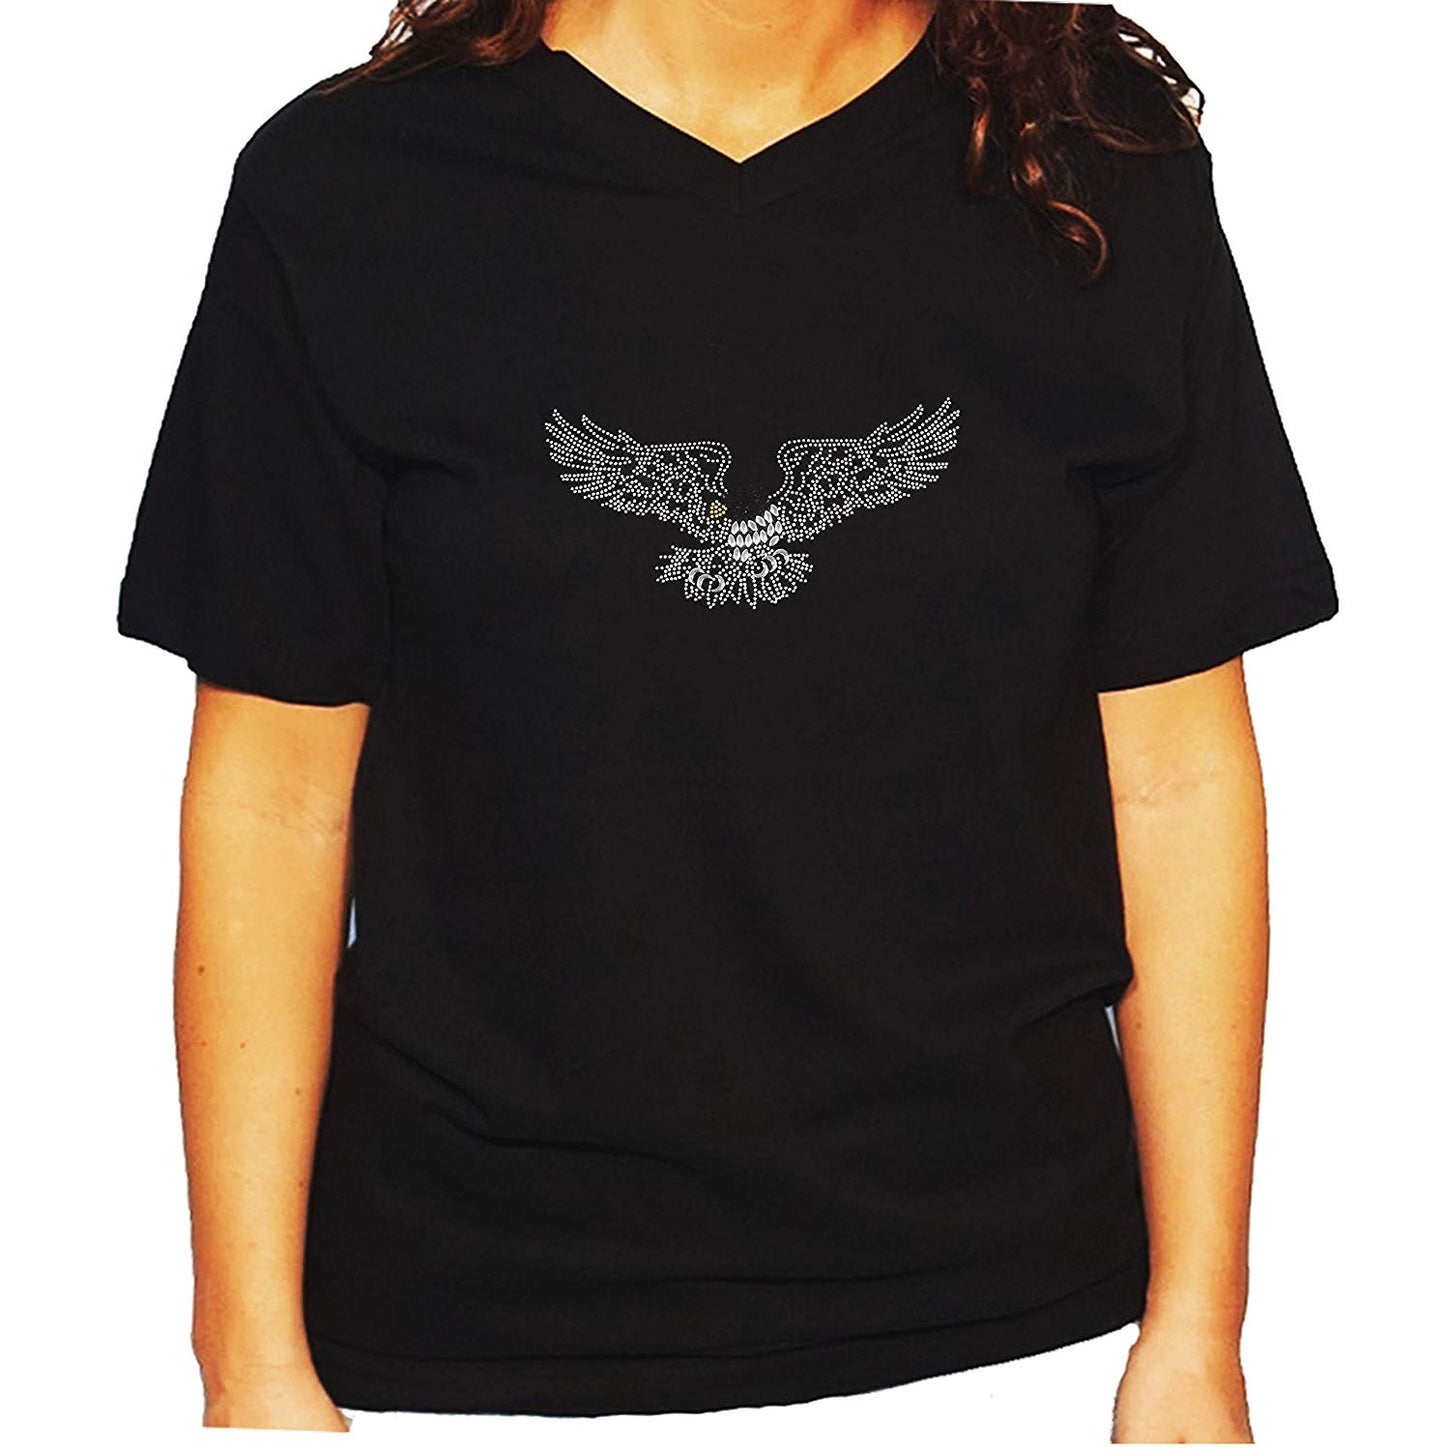 Women's / Unisex T-Shirt with Flying Eagle in Rhinestones